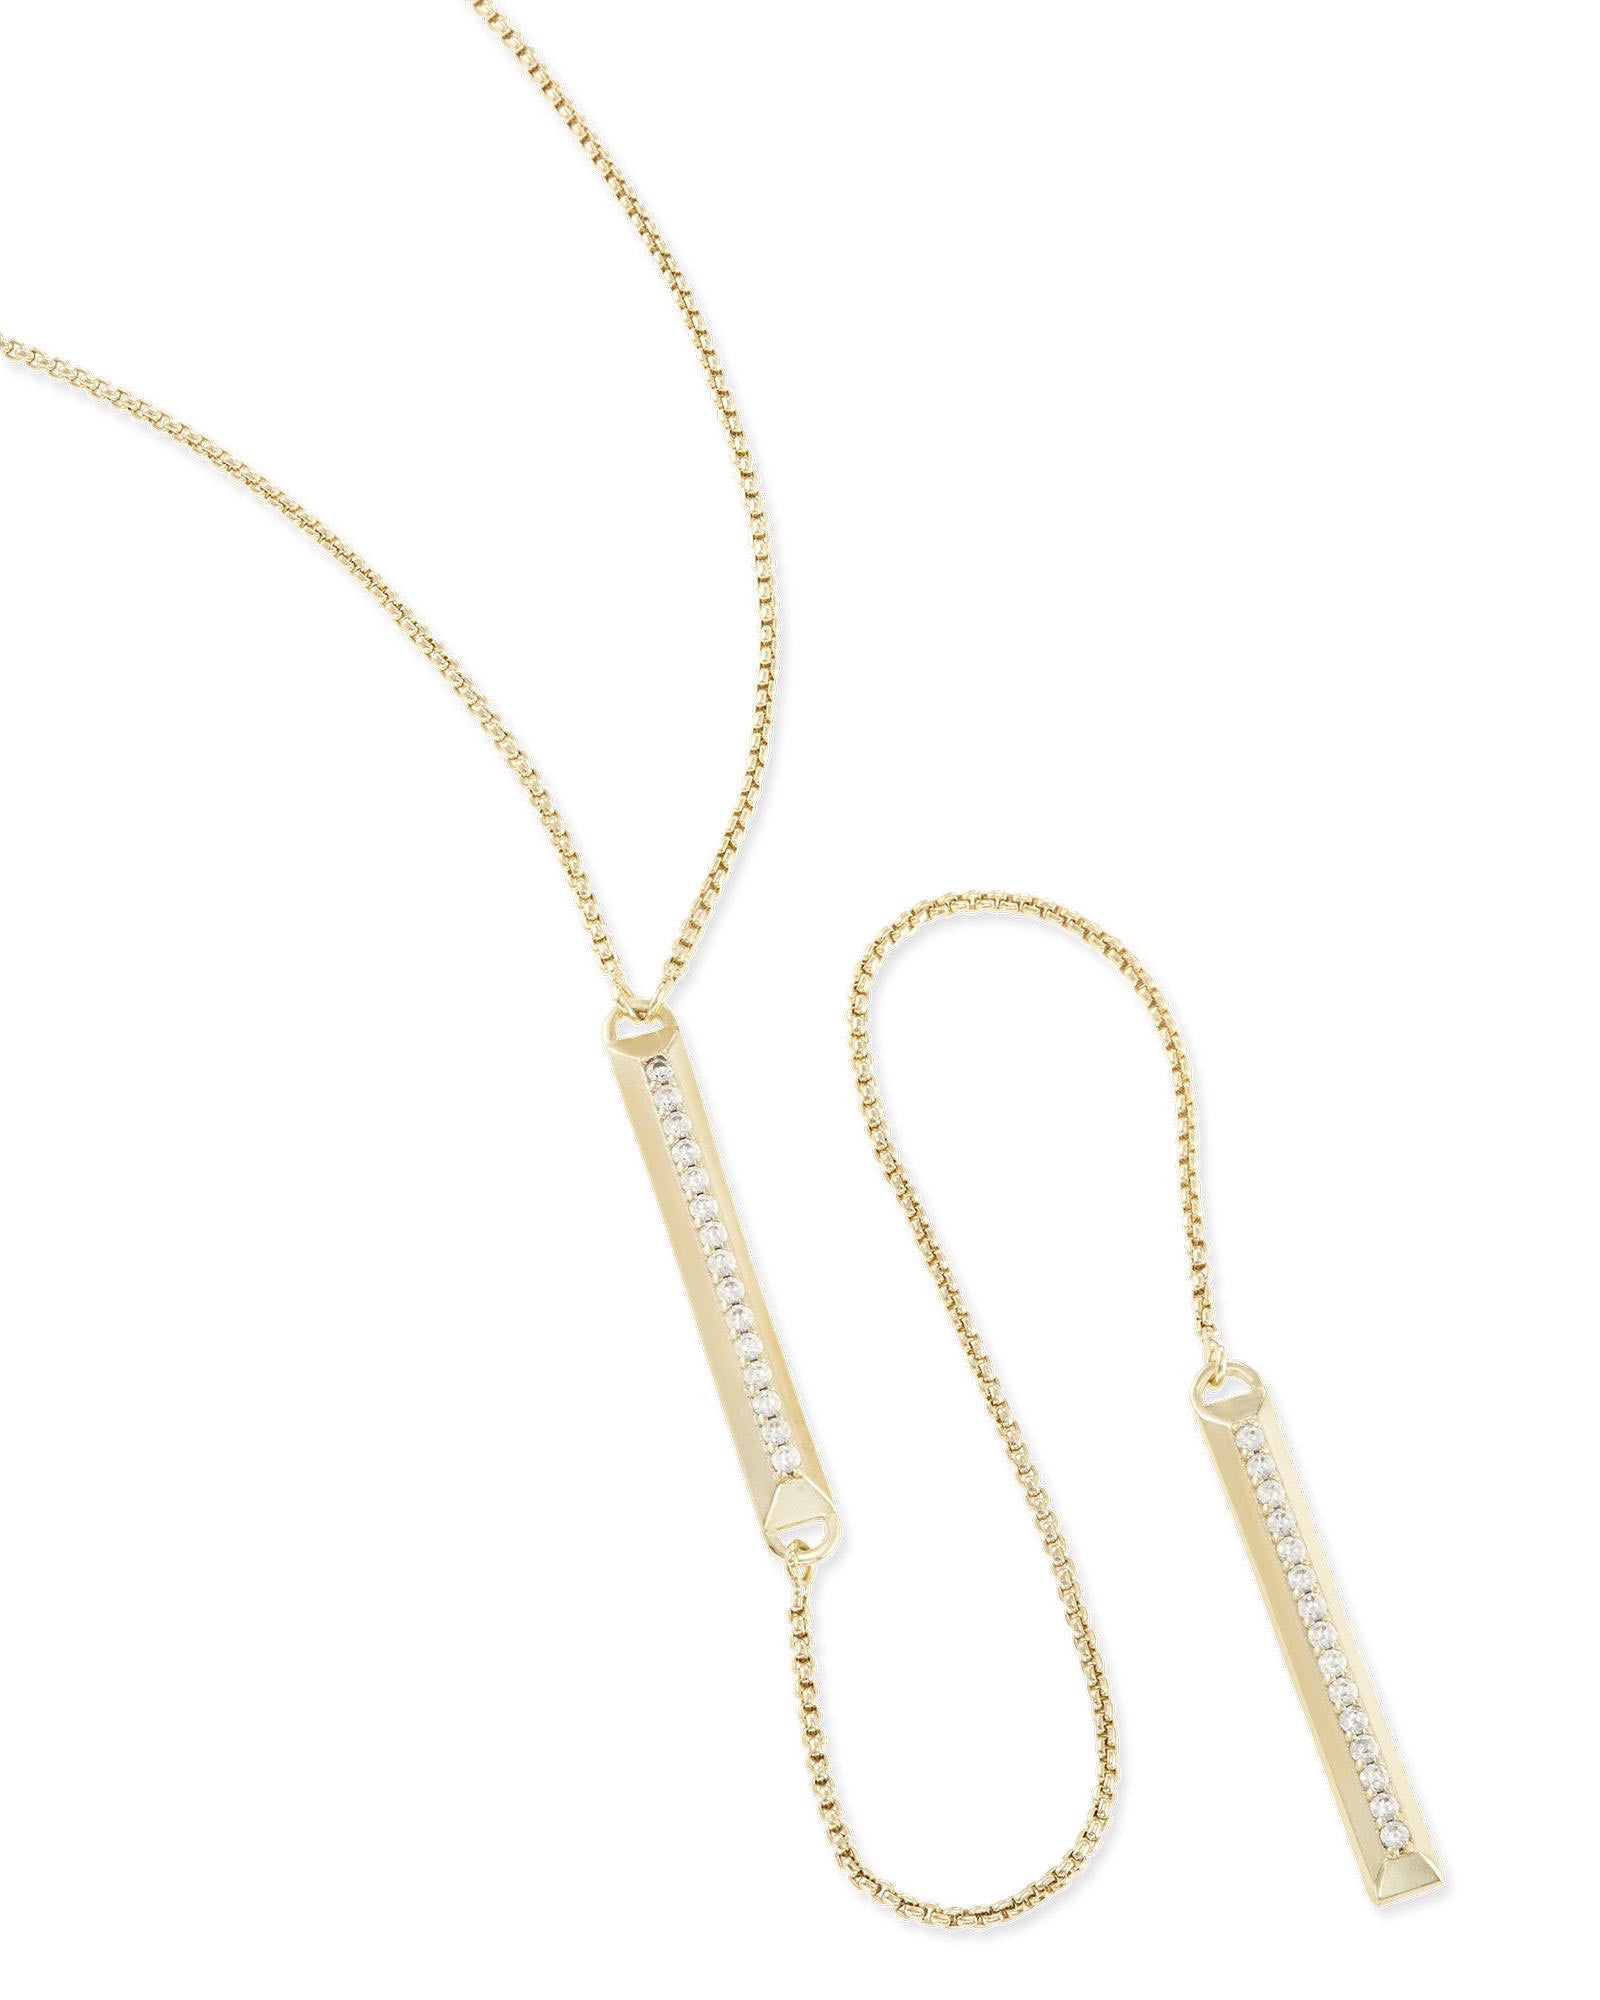 Kendra Scott Shea Lariat Necklace in Gold